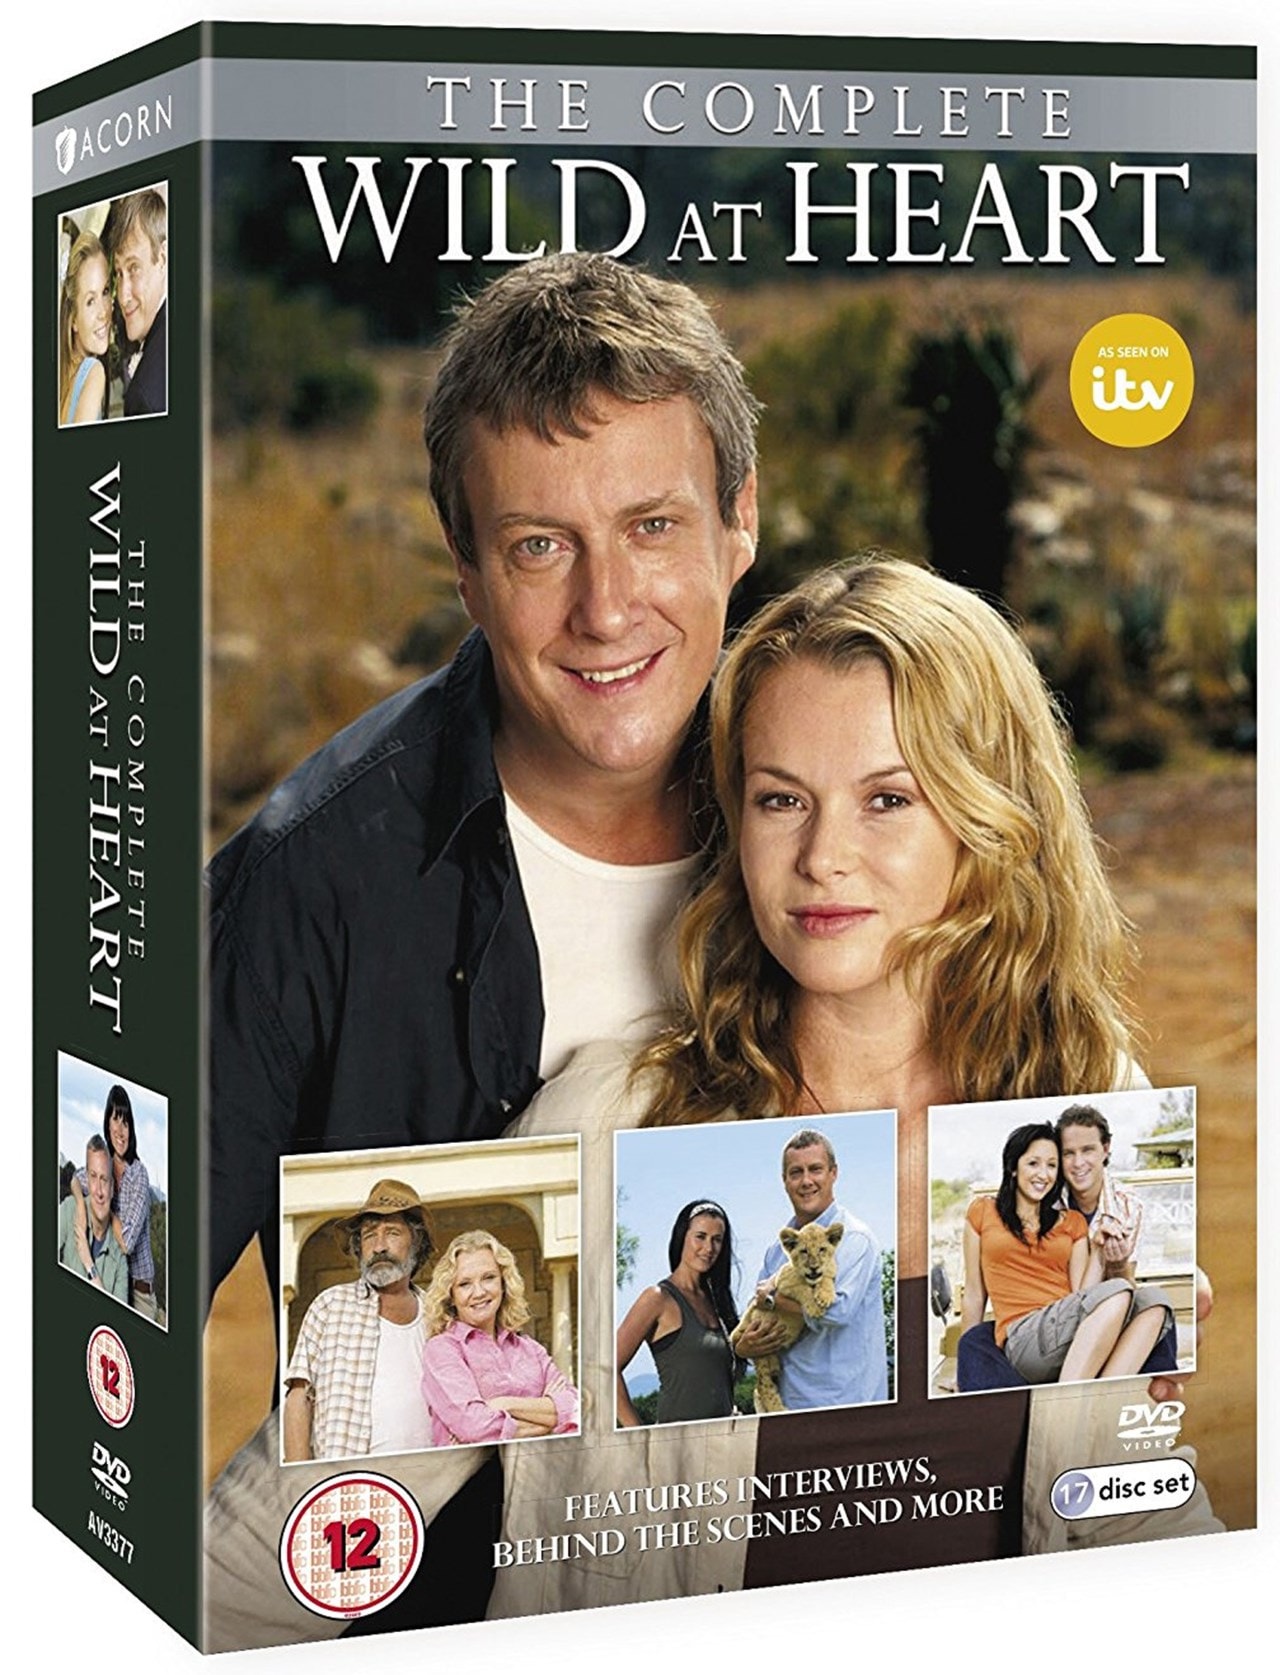 wild at heart soundtrack list